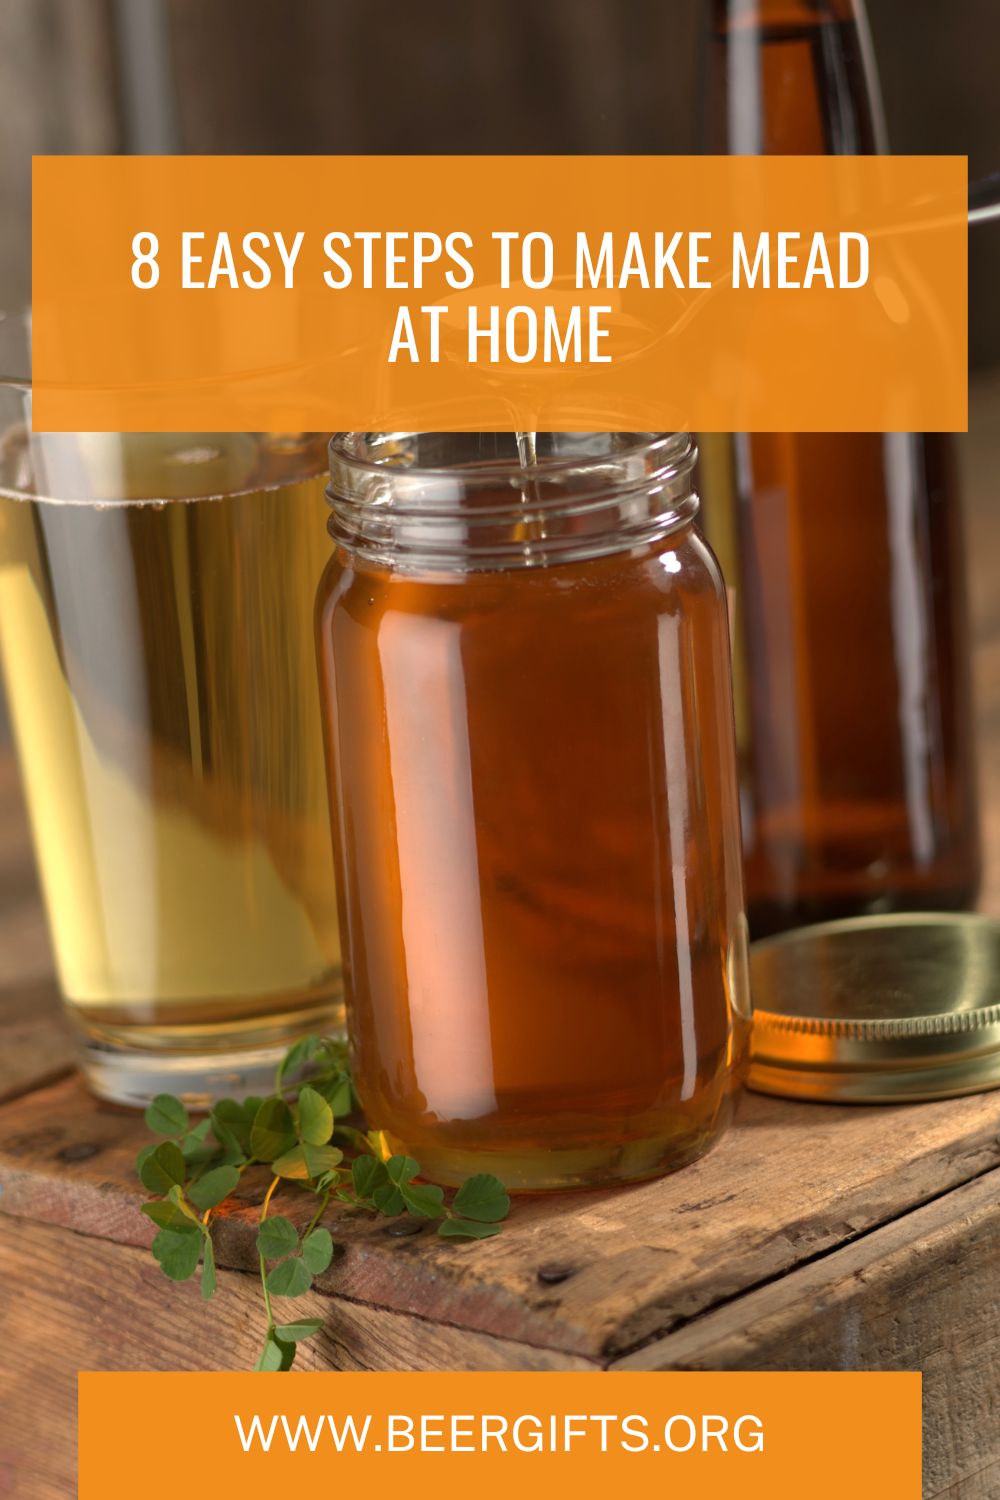 8 Easy Steps to Make Mead at Home1